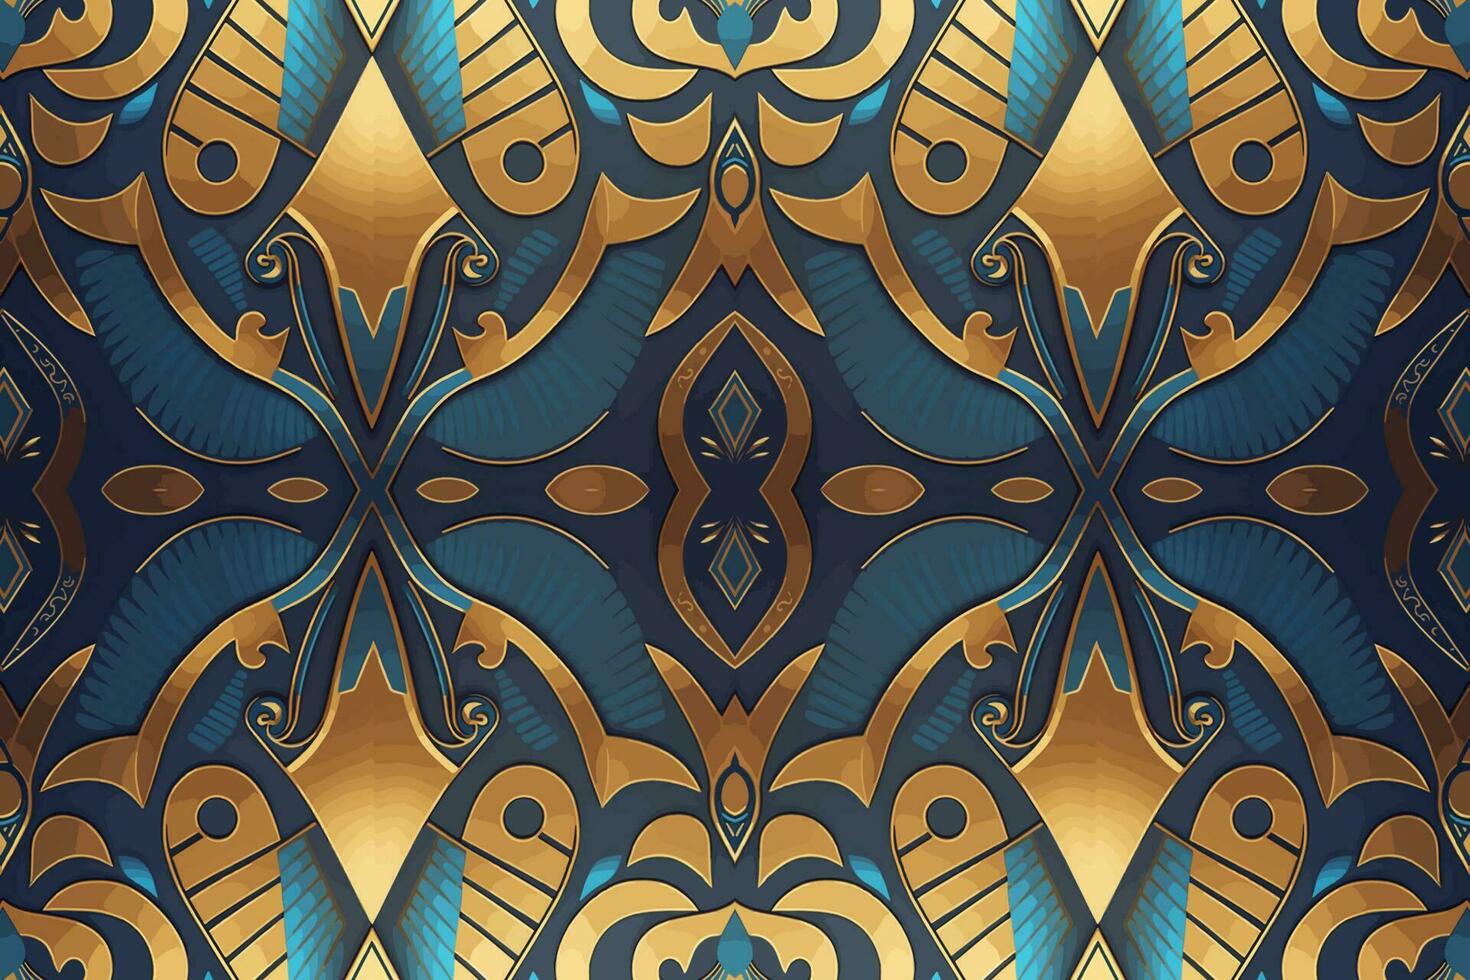 Egyptian pattern gold and blue background. Abstract traditional folk ancient antique tribal ethnic graphic line. Ornate elegant luxury vintage retro style. Texture textile fabric ethnic Egypt patterns vector